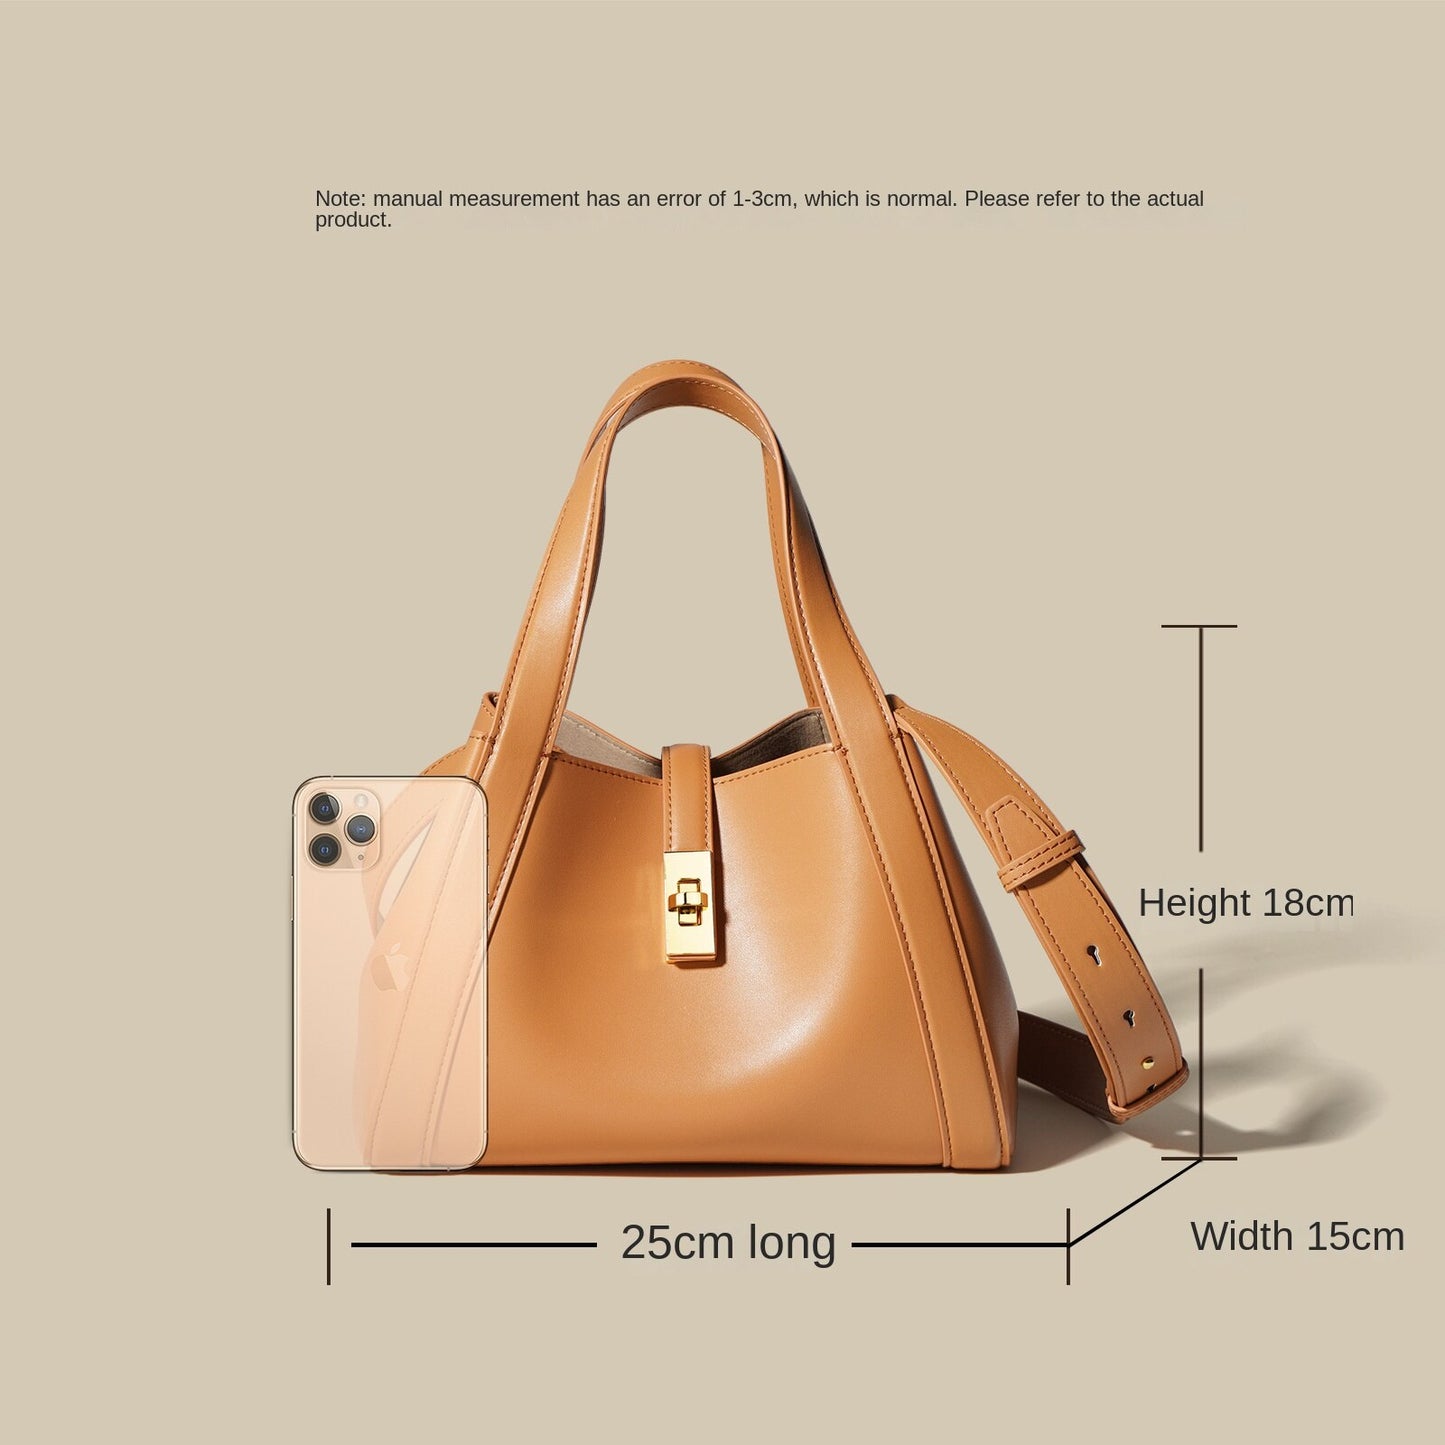 Luxury Designer Flap Bags Handbags for Women Soft Cowhide Bucket Tote Bag Crossbody Bags with 3 Shoulder Straps Gold Rotary Lock